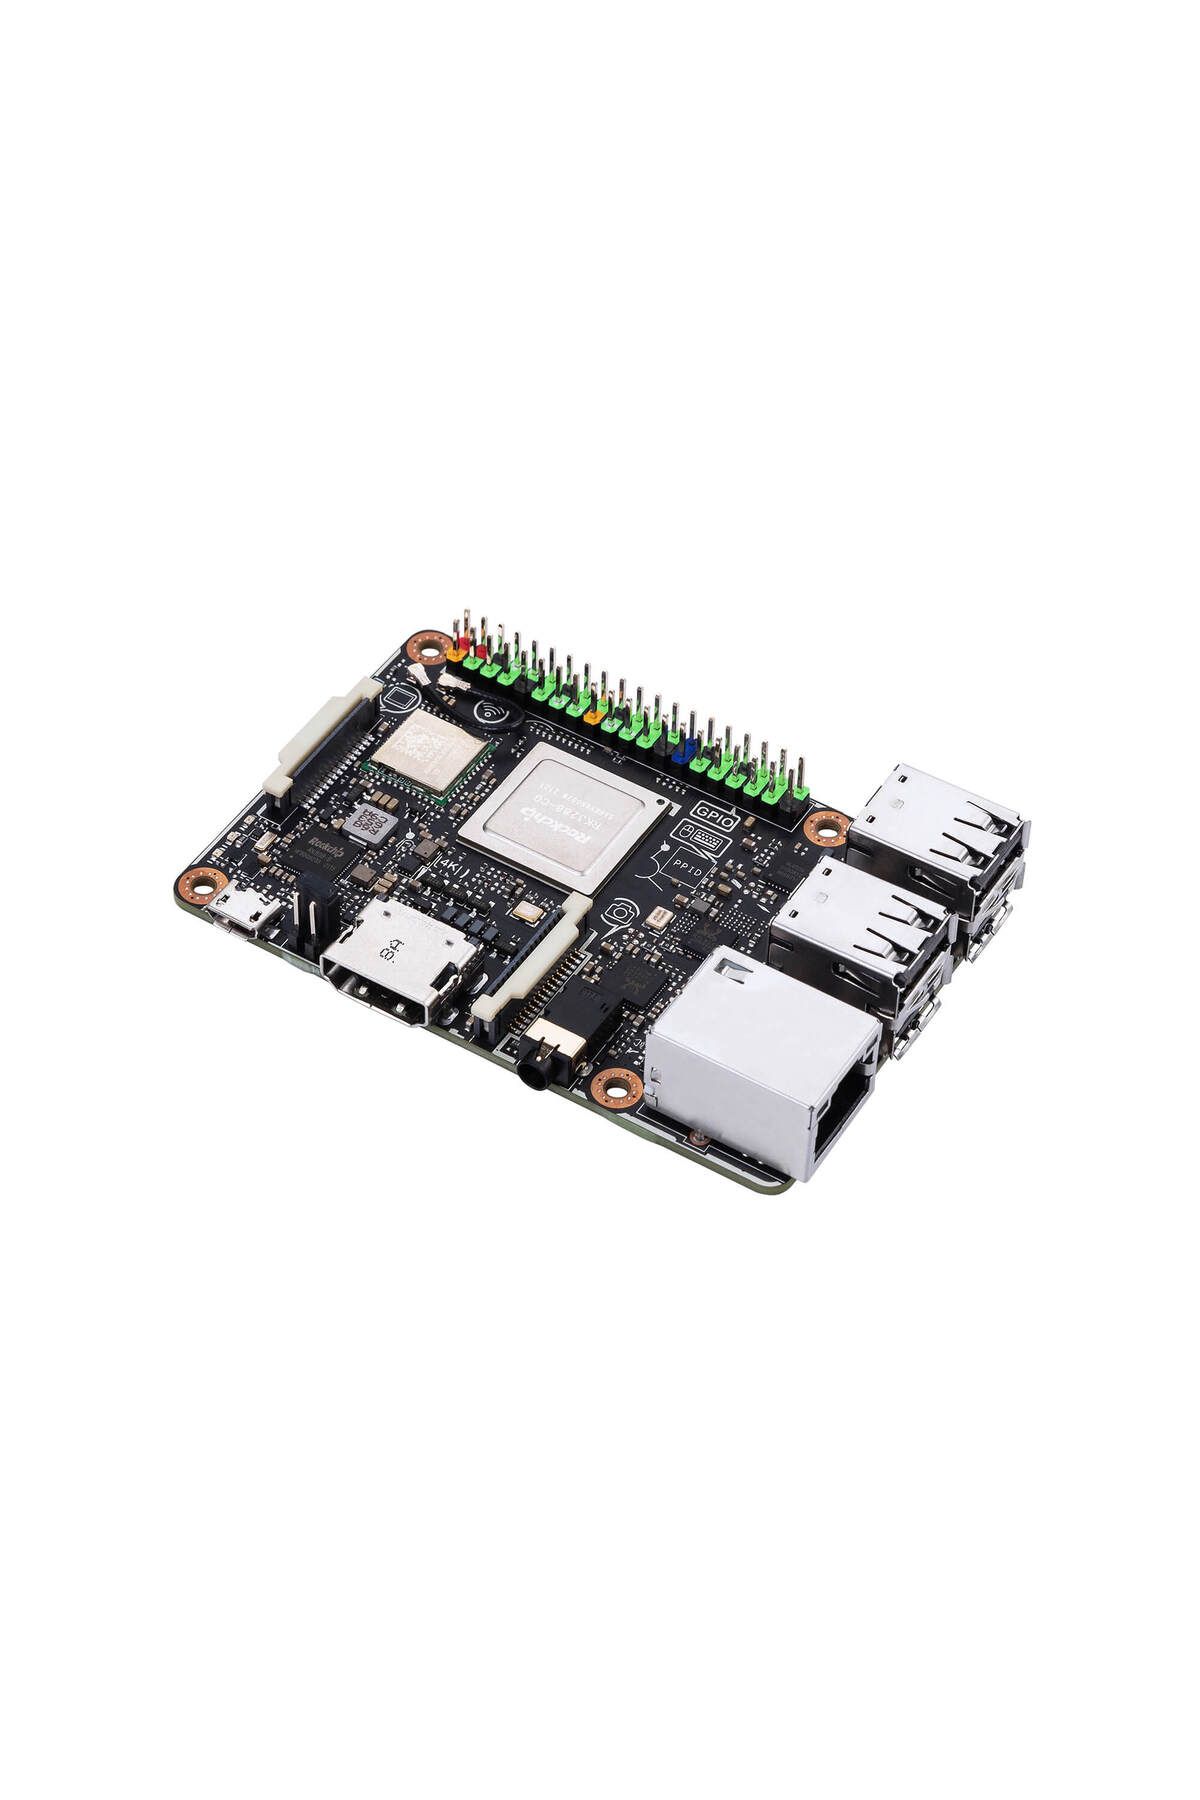 ASUS Tinker Board R2.0a2g